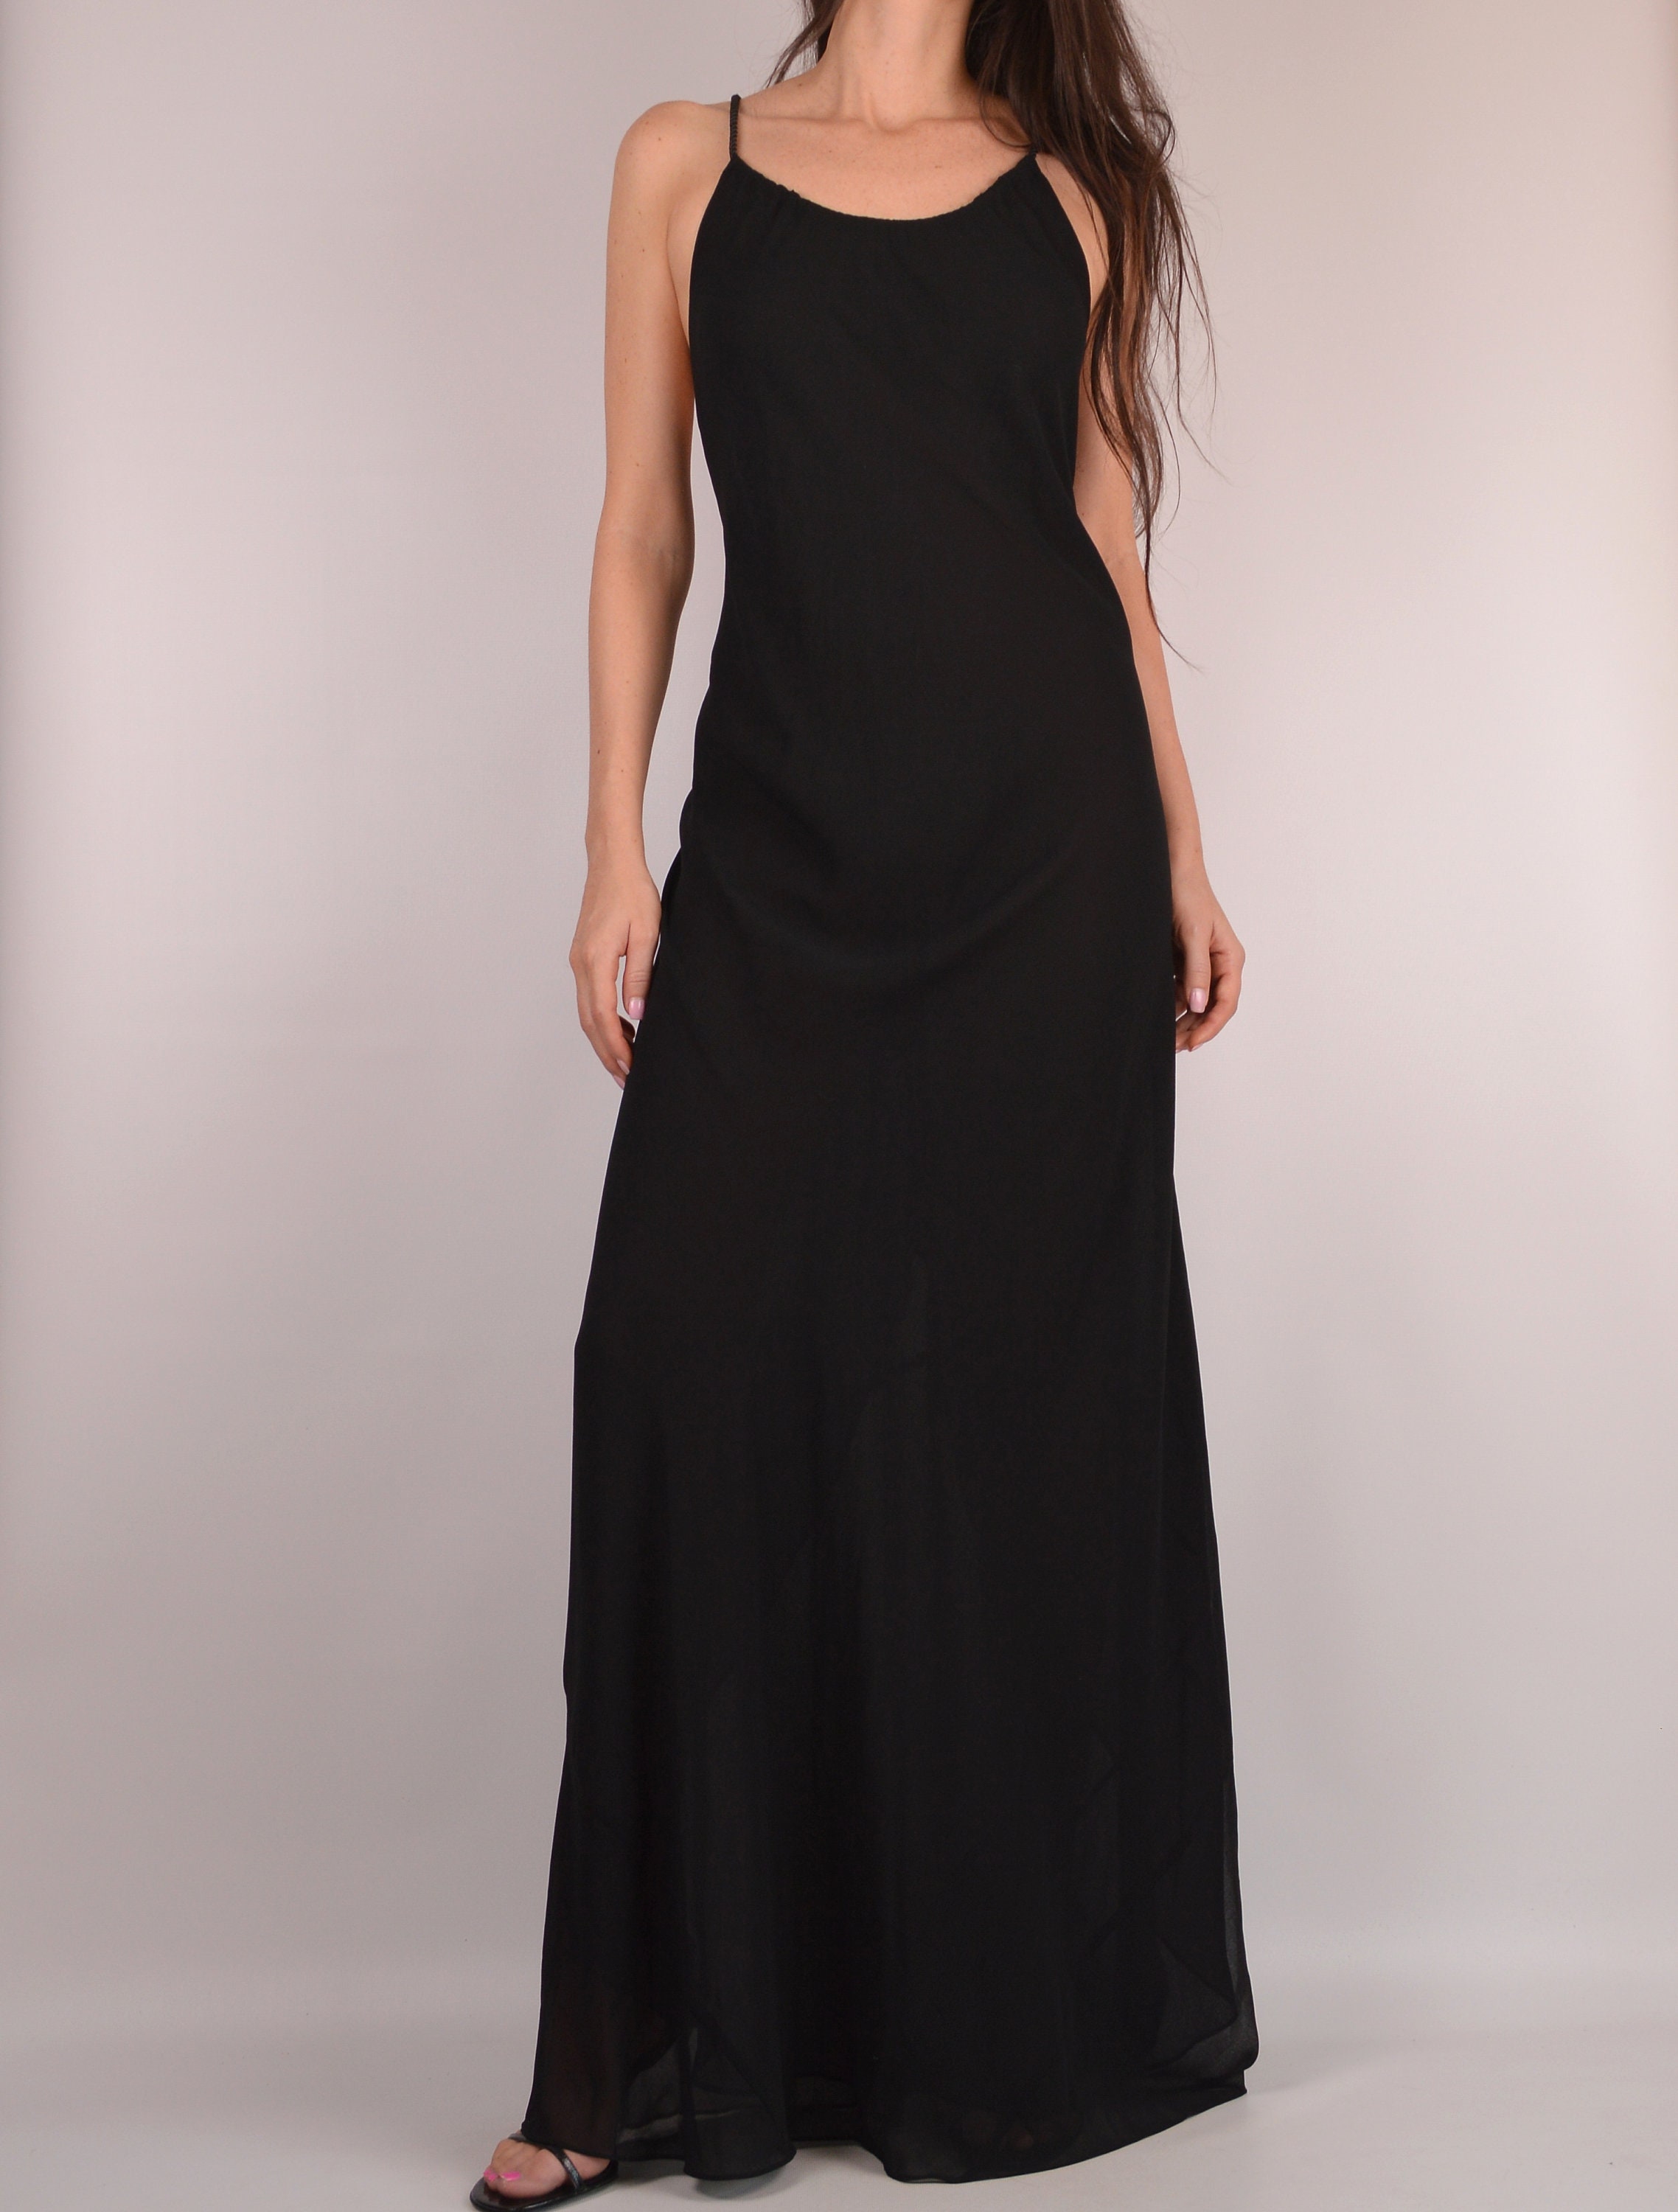 HALF OFF! Backless Chiffon Slip Gown / S